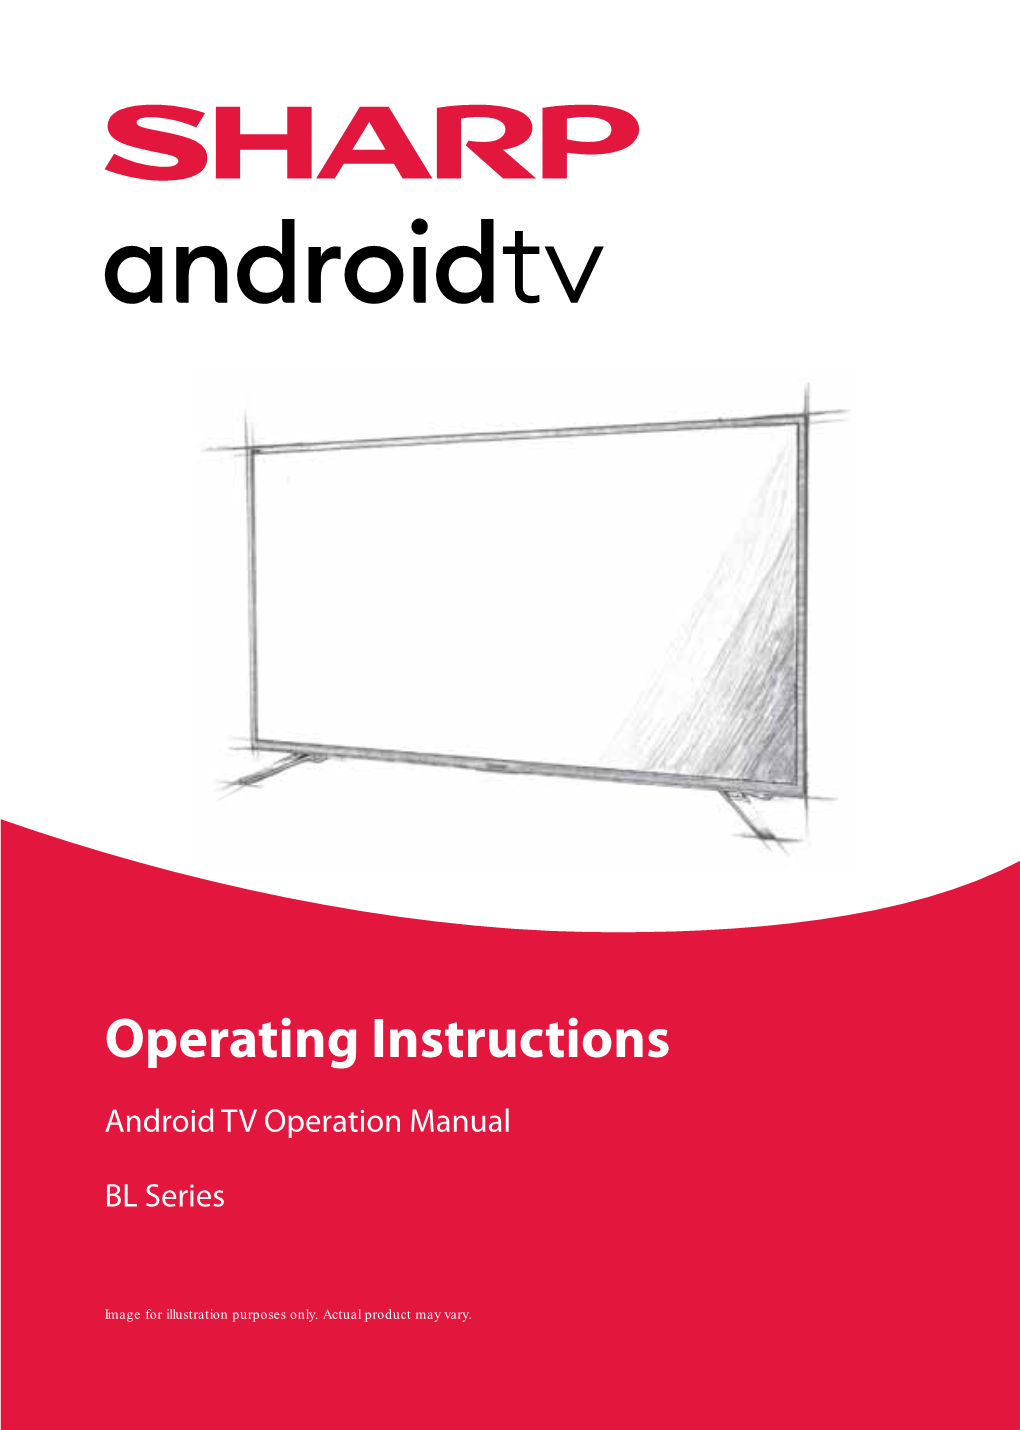 Operating Instructions for Sharp Android Televisions